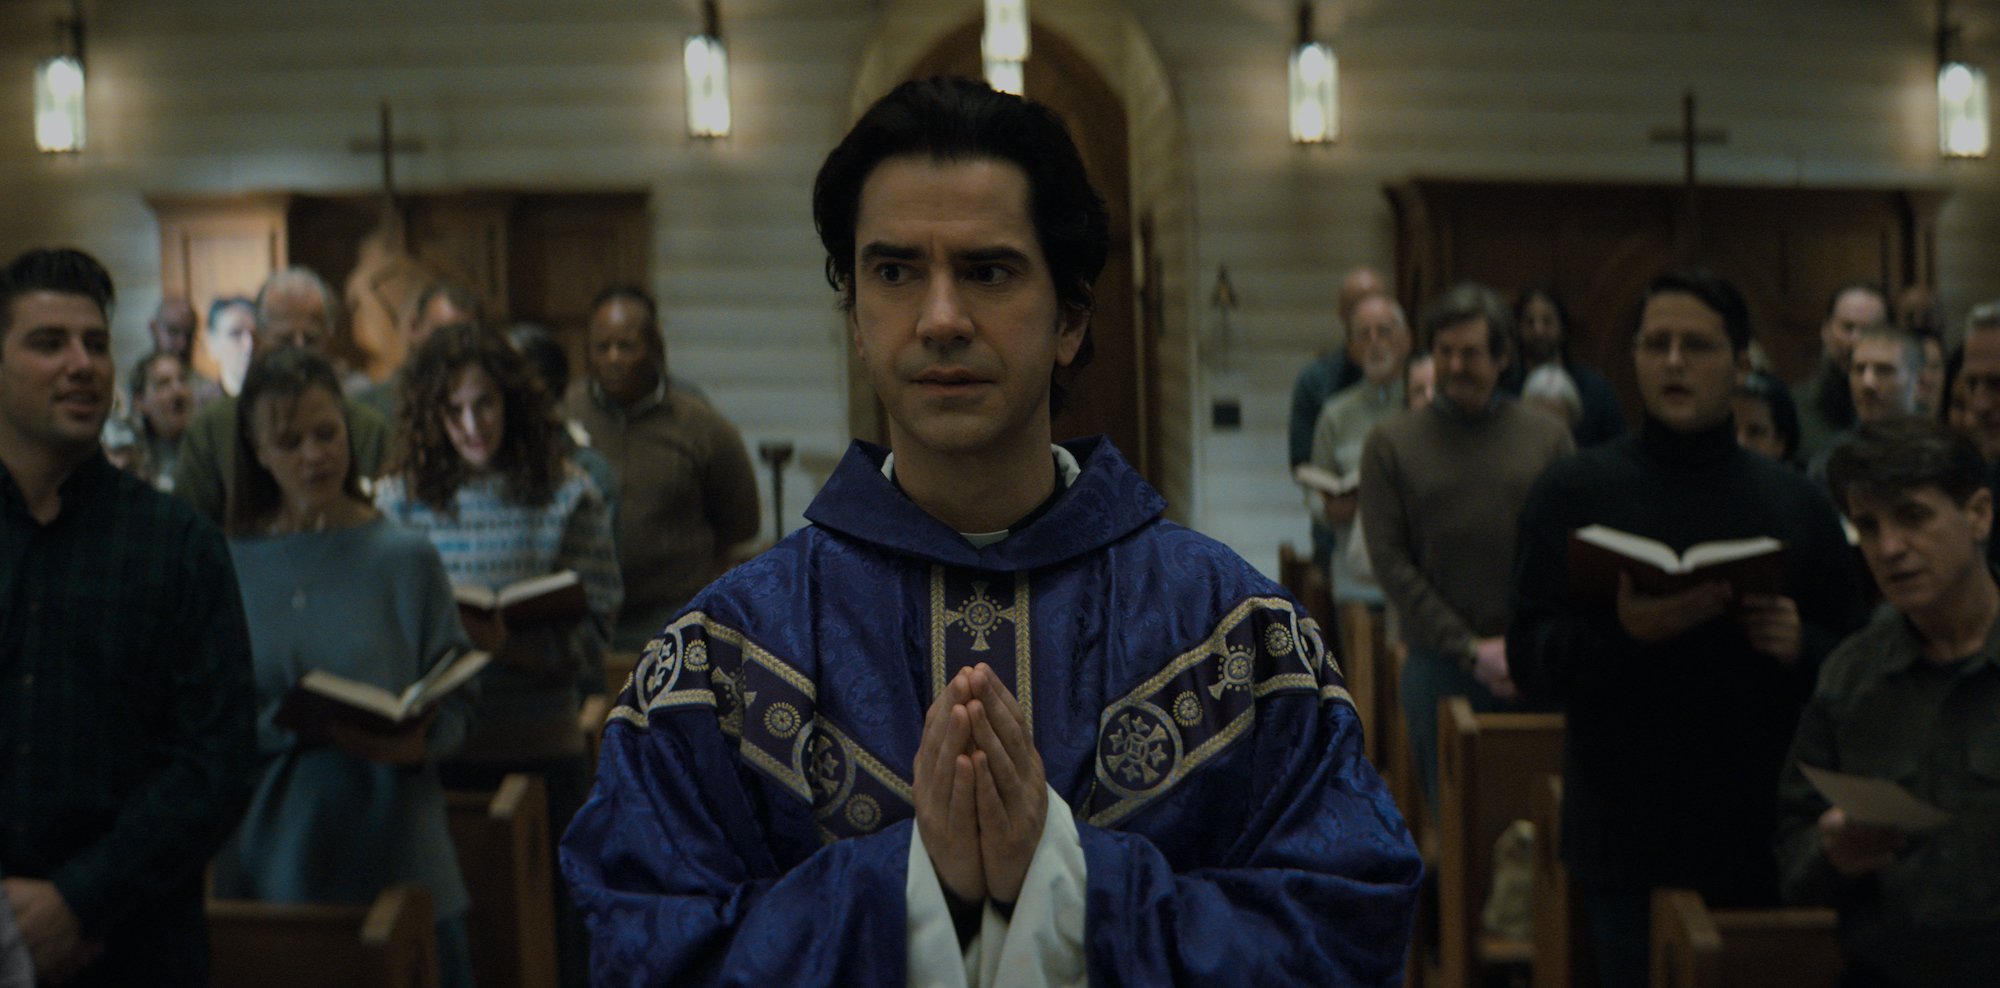 Hamish Linklater as Father Paul walking down the aisle at the church of Crockett Island in 'Midnight Mass' 